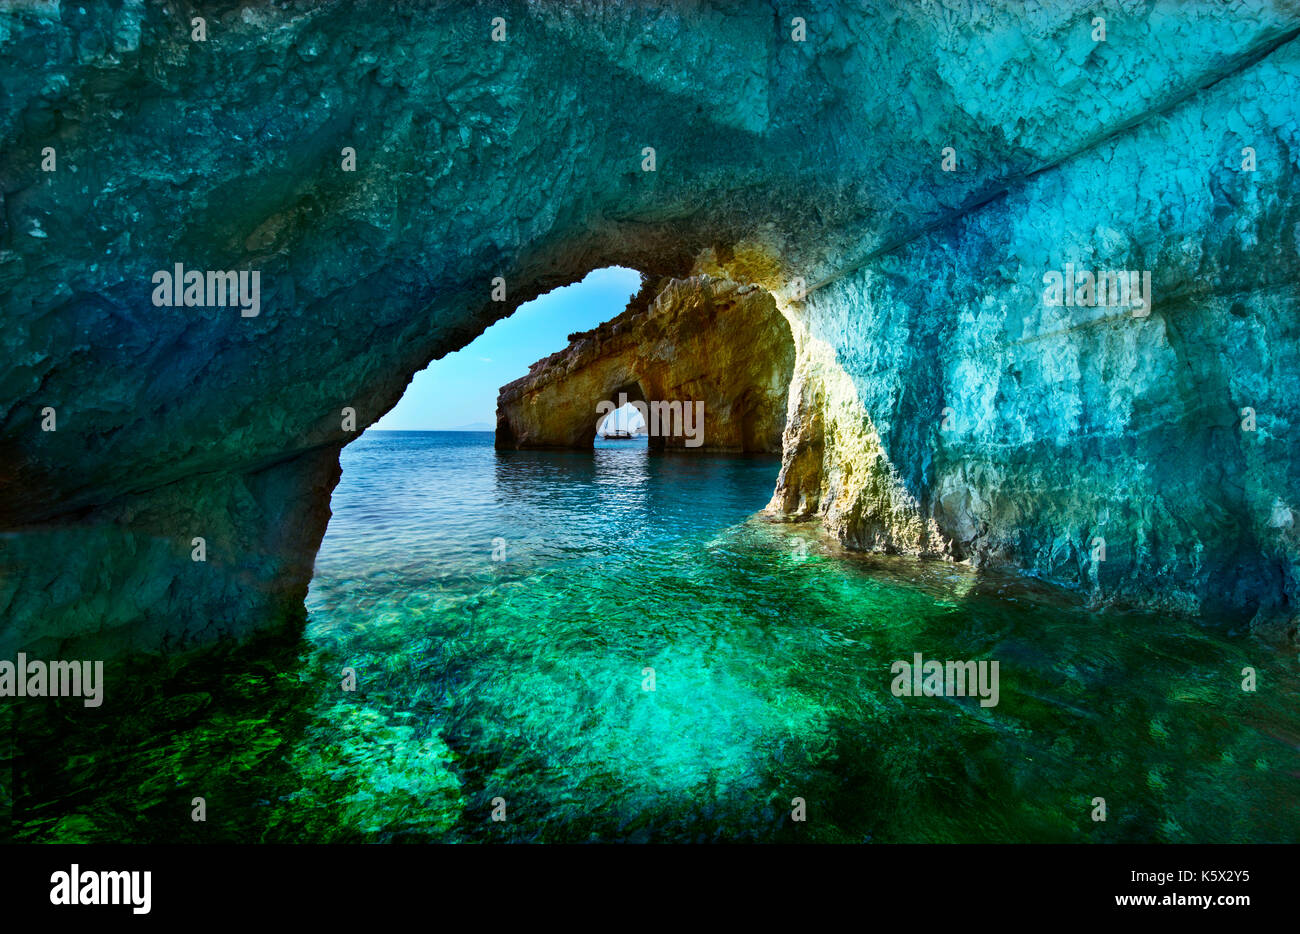 Greece, The island of Zakynthos. One of the most beautiful blue caves in the world. The Ionian Sea.  Blue caves of the island of Zakynthos Stock Photo